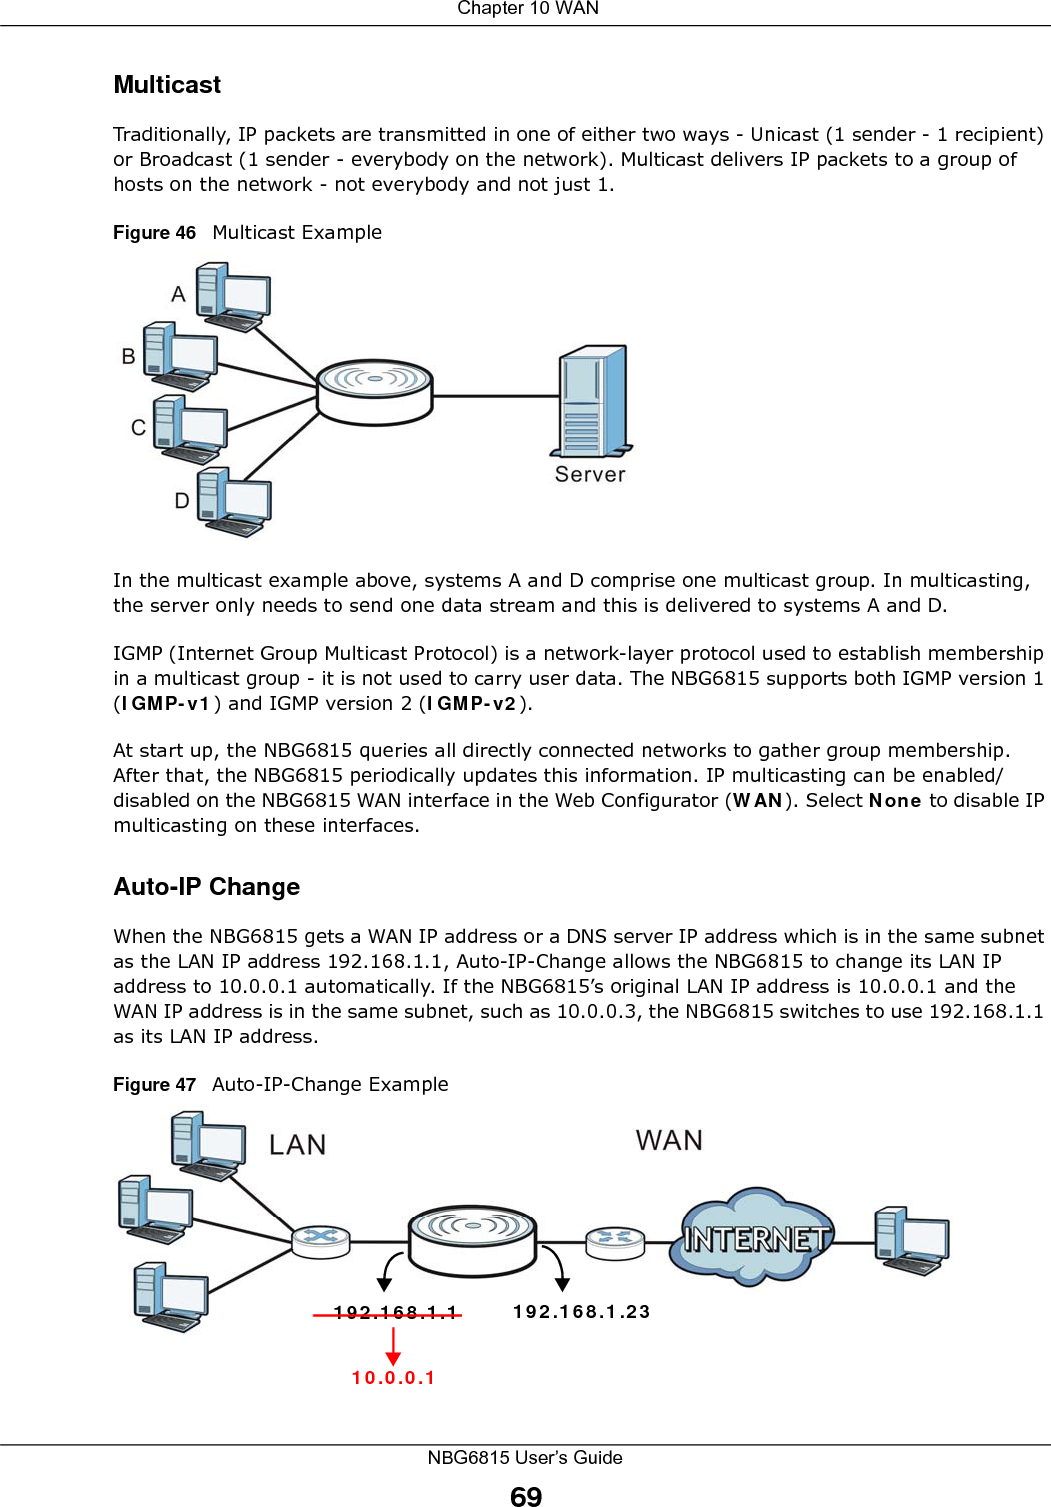  Chapter 10 WANNBG6815 User’s Guide69MulticastTraditionally, IP packets are transmitted in one of either two ways - Unicast (1 sender - 1 recipient) or Broadcast (1 sender - everybody on the network). Multicast delivers IP packets to a group of hosts on the network - not everybody and not just 1. Figure 46   Multicast ExampleIn the multicast example above, systems A and D comprise one multicast group. In multicasting, the server only needs to send one data stream and this is delivered to systems A and D. IGMP (Internet Group Multicast Protocol) is a network-layer protocol used to establish membership in a multicast group - it is not used to carry user data. The NBG6815 supports both IGMP version 1 (IGMP-v1) and IGMP version 2 (IGMP-v2). At start up, the NBG6815 queries all directly connected networks to gather group membership. After that, the NBG6815 periodically updates this information. IP multicasting can be enabled/disabled on the NBG6815 WAN interface in the Web Configurator (WAN). Select None to disable IP multicasting on these interfaces.Auto-IP ChangeWhen the NBG6815 gets a WAN IP address or a DNS server IP address which is in the same subnet as the LAN IP address 192.168.1.1, Auto-IP-Change allows the NBG6815 to change its LAN IP address to 10.0.0.1 automatically. If the NBG6815’s original LAN IP address is 10.0.0.1 and the WAN IP address is in the same subnet, such as 10.0.0.3, the NBG6815 switches to use 192.168.1.1 as its LAN IP address.Figure 47   Auto-IP-Change Example192.168.1.1 192.168.1.2310.0.0.1